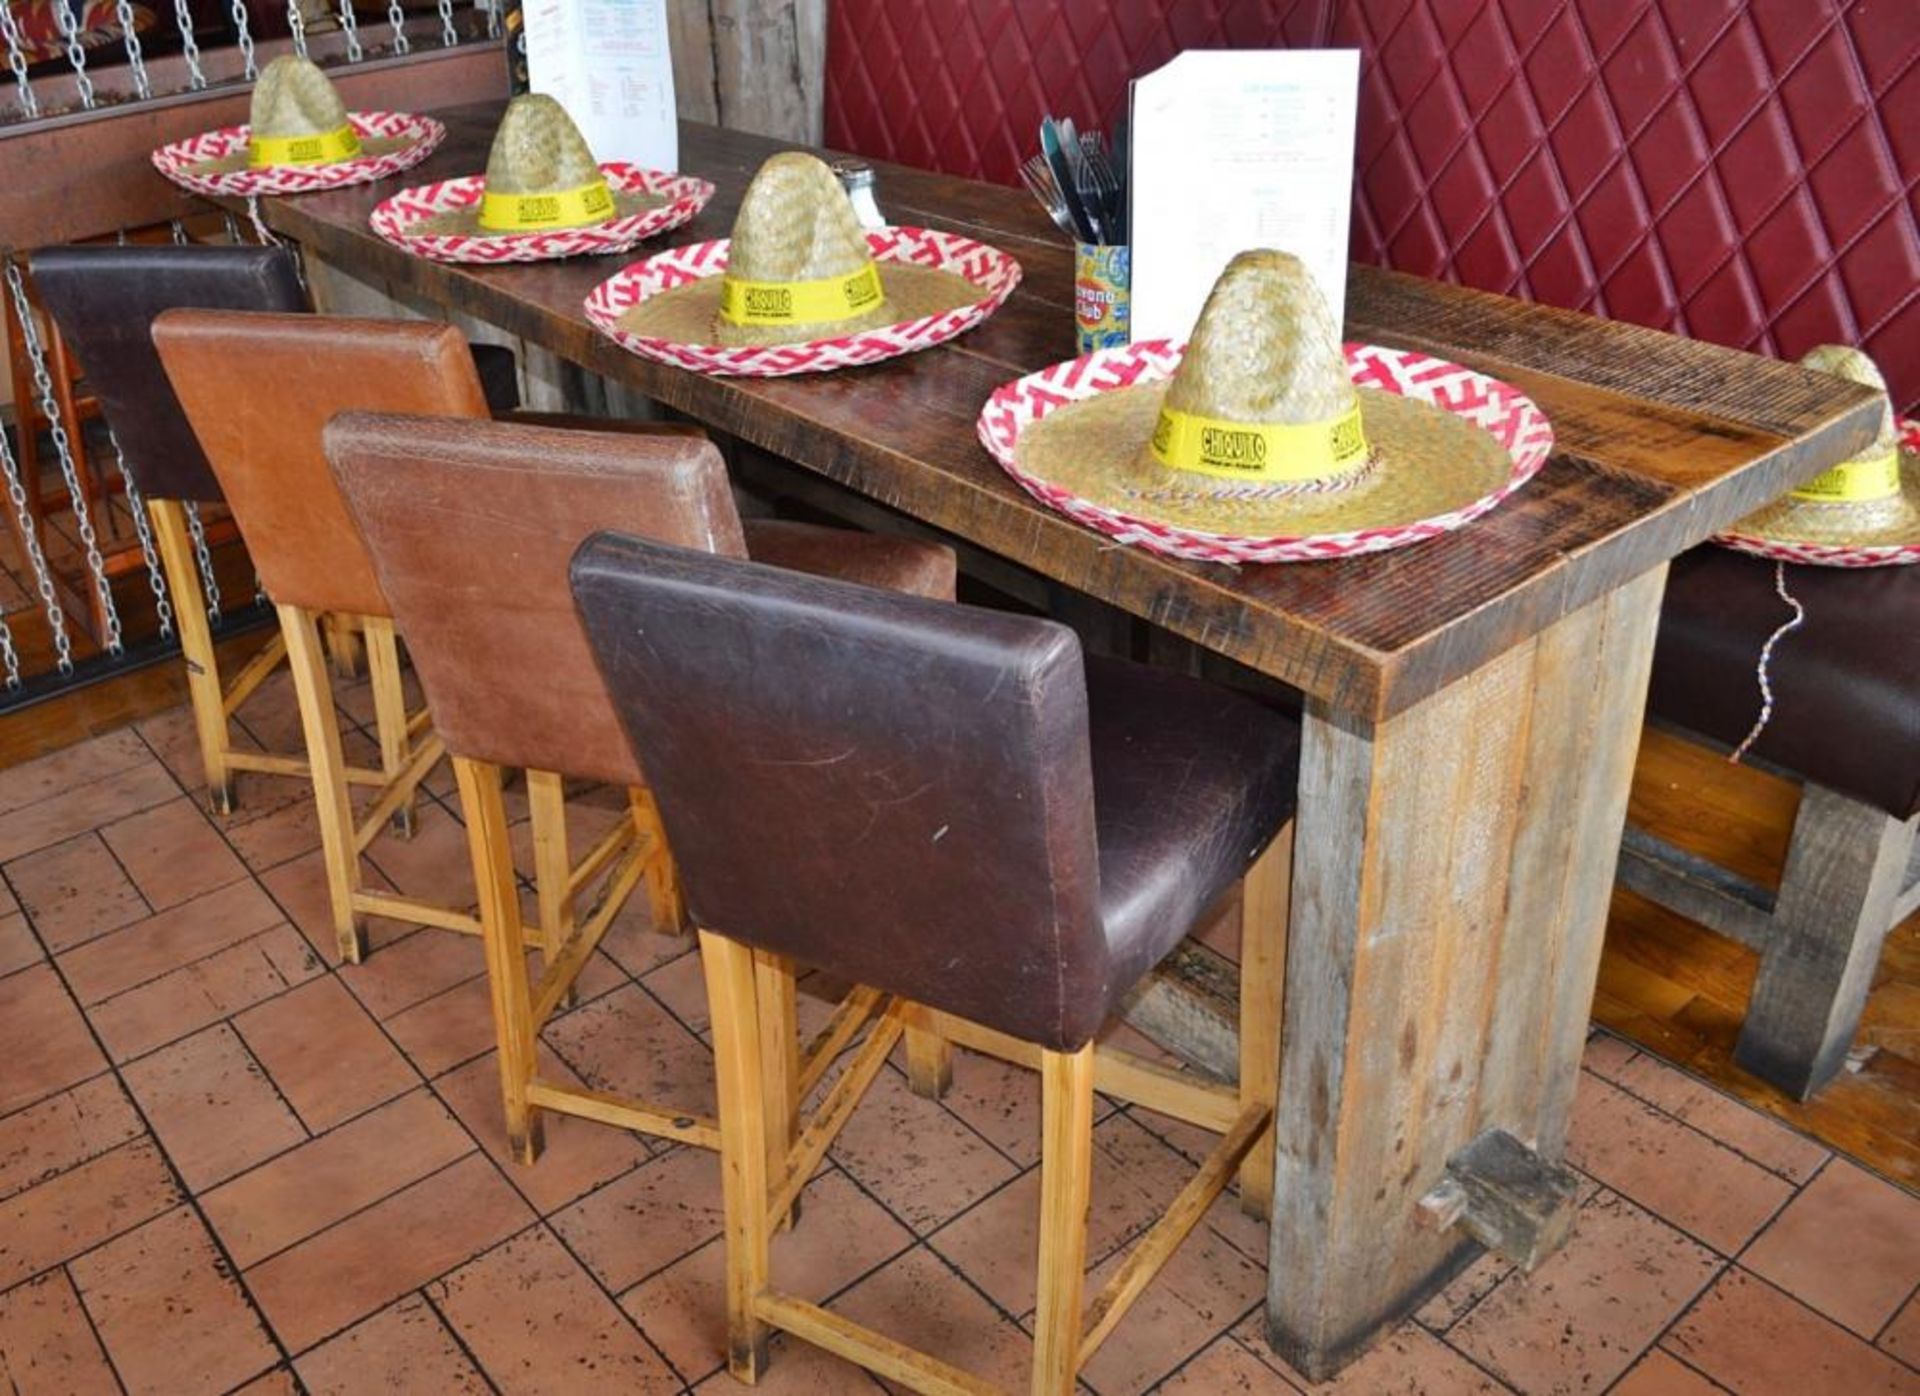 8 x Wooden Bar Stools With Faux Leather Seats in Various Colours - CL363 - Location: Stevenage SG1 - Image 3 of 5